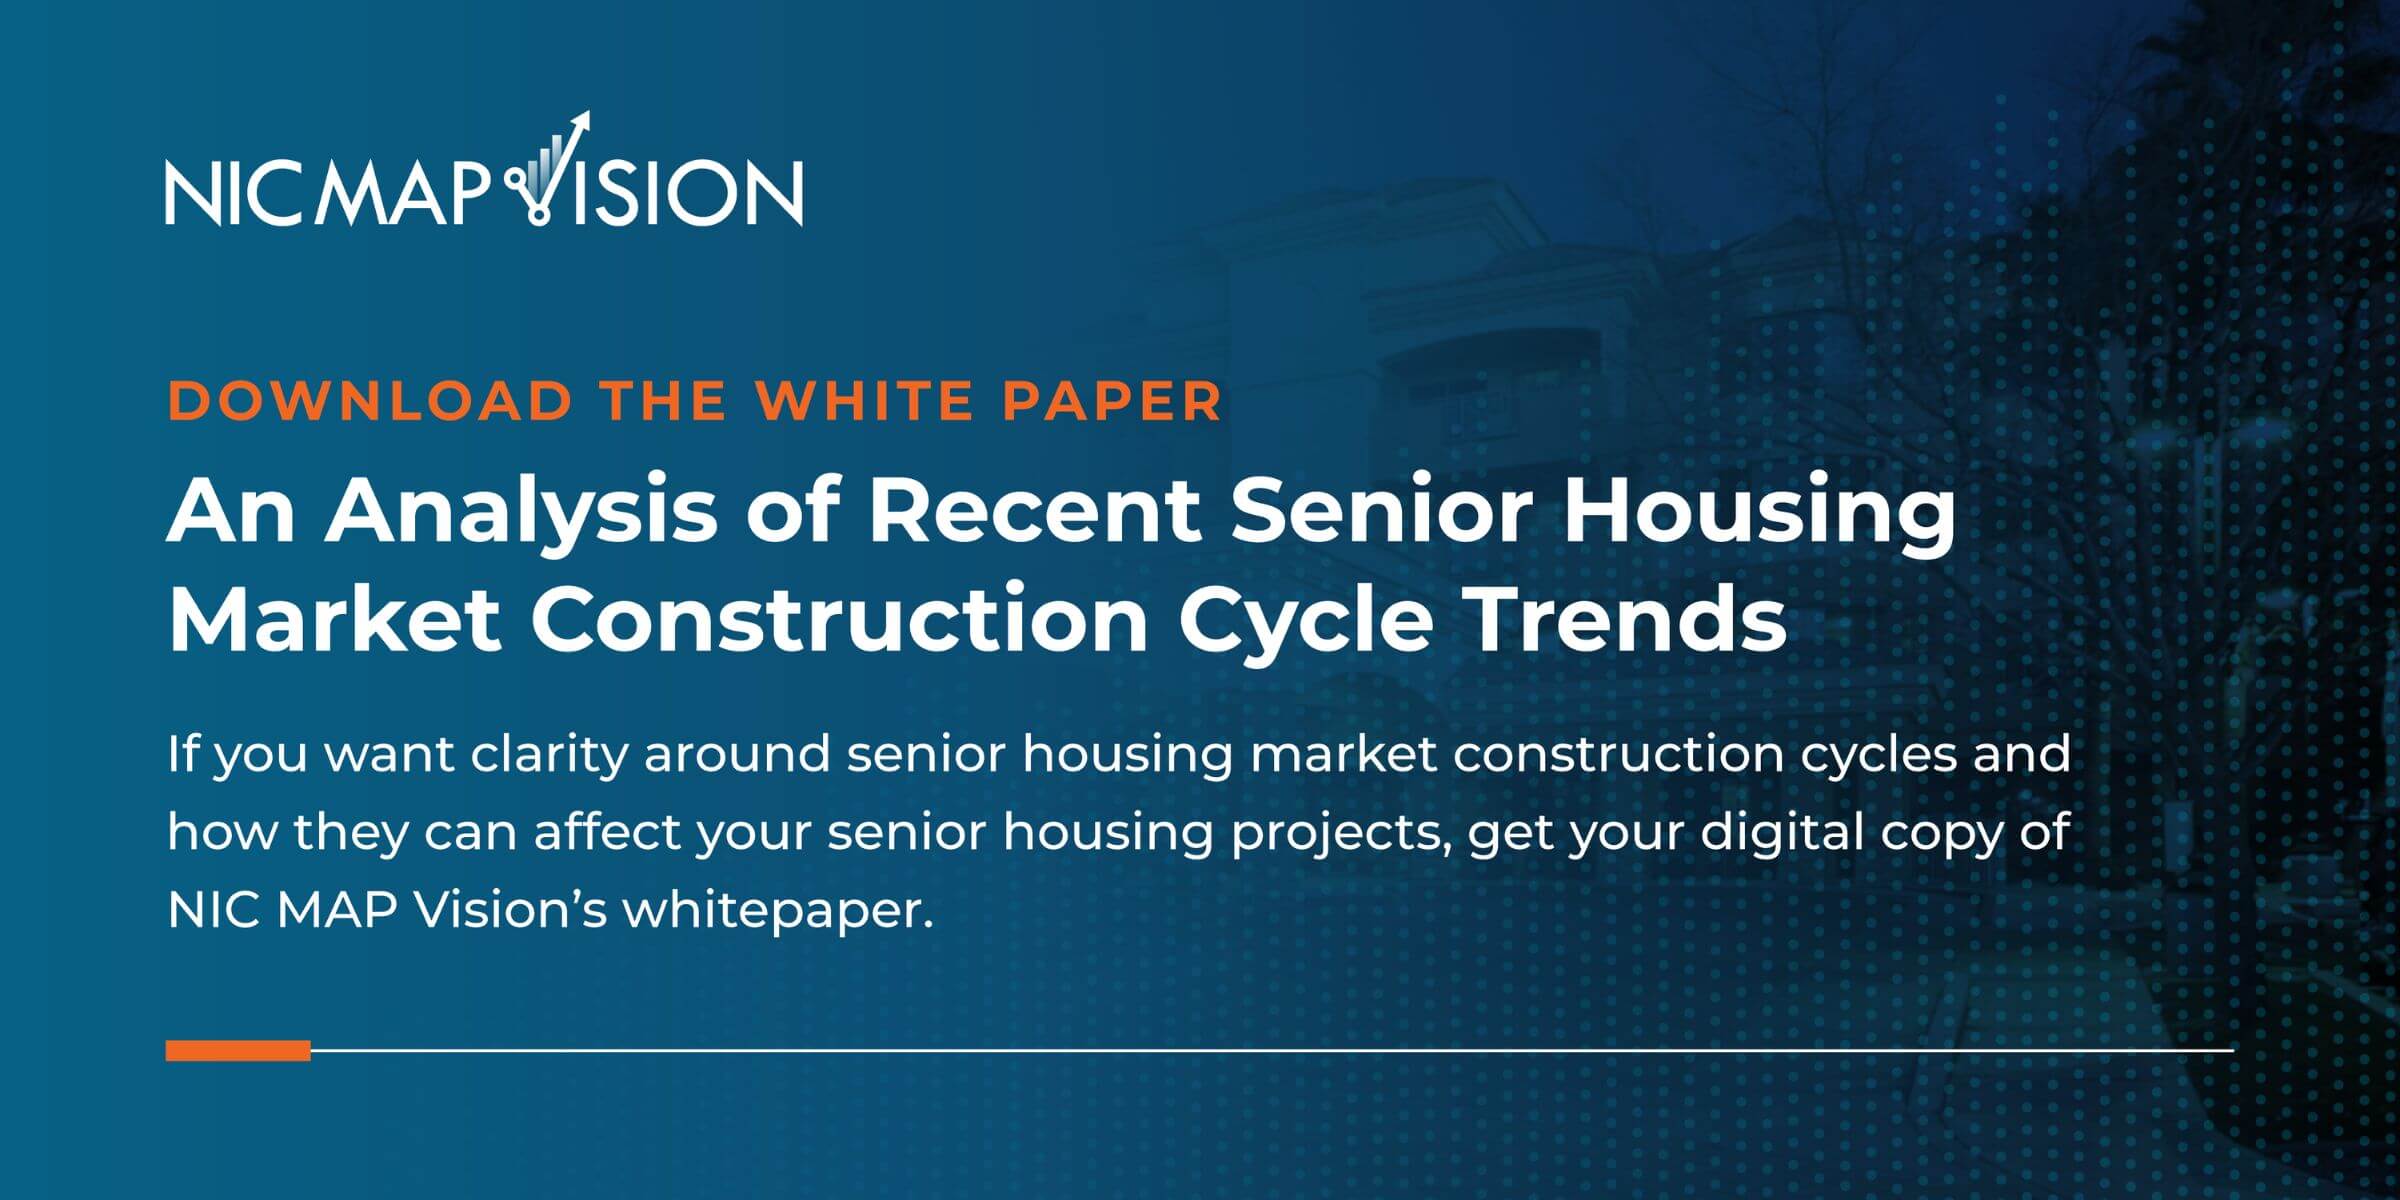 An Analysis of Recent Senior Housing Market Construction Cycle Trends